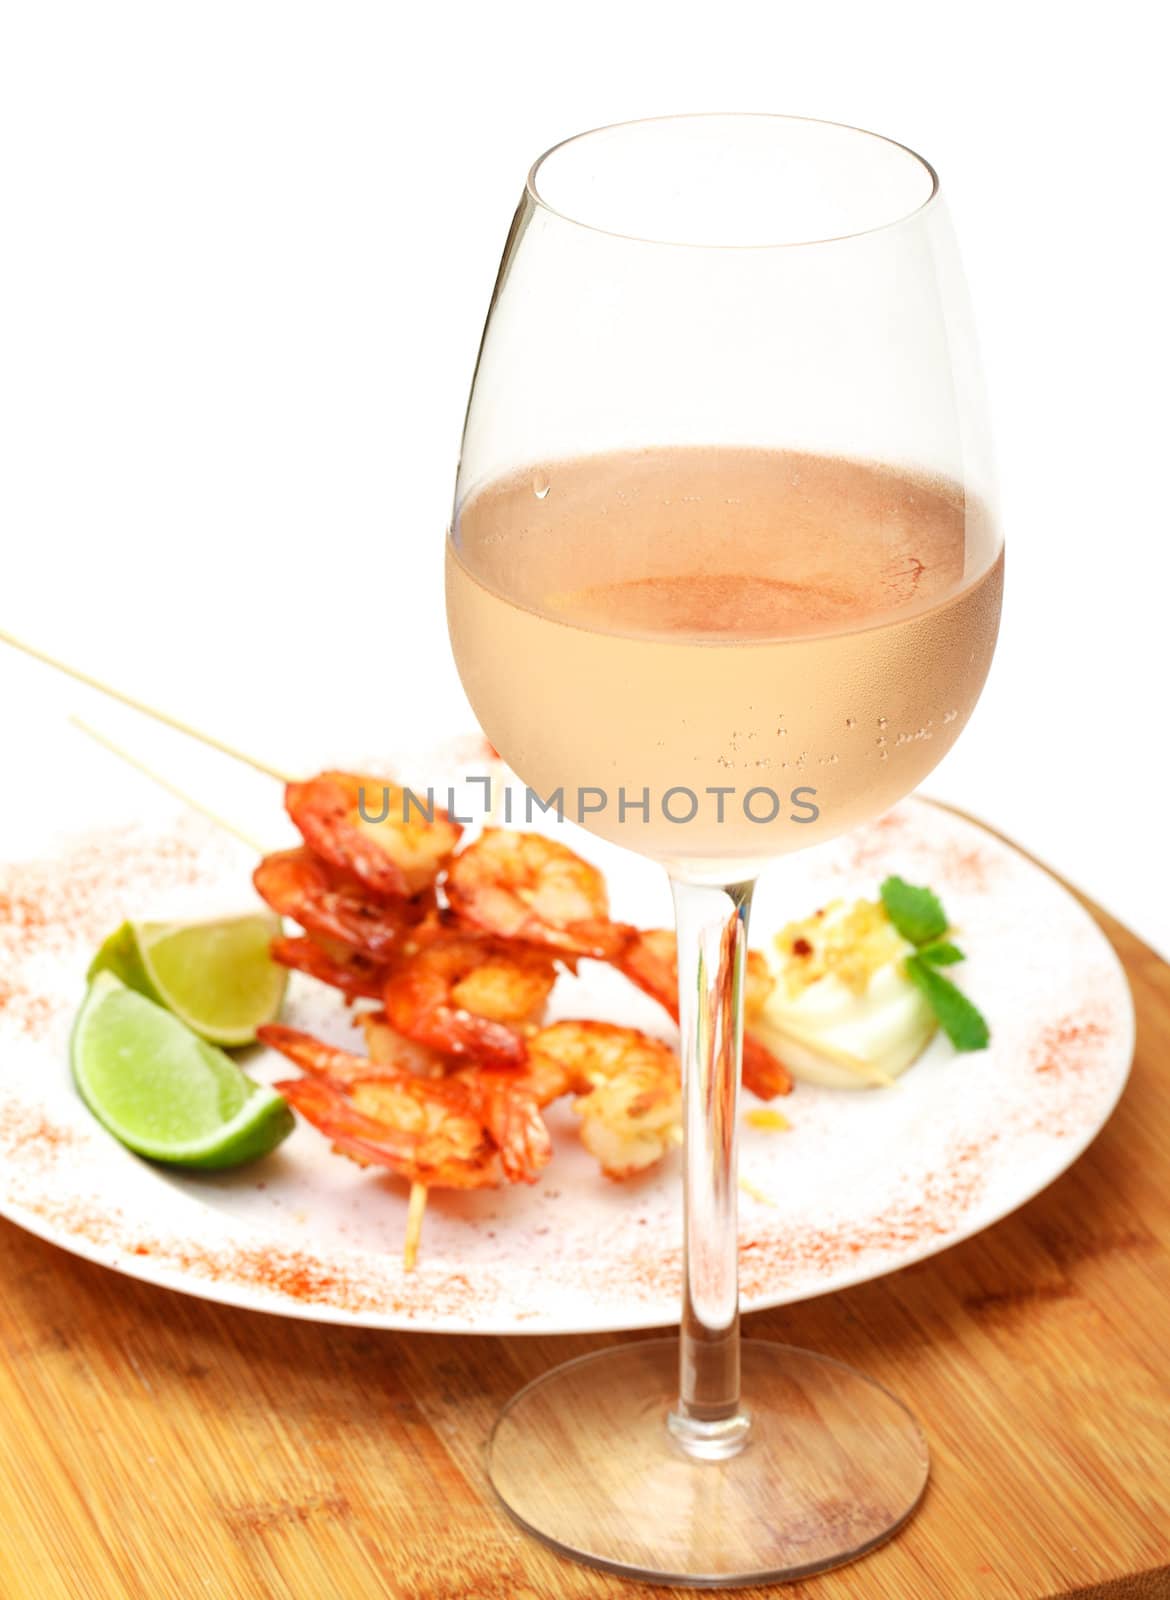 Fried King Prawns Served in Plate, on white background